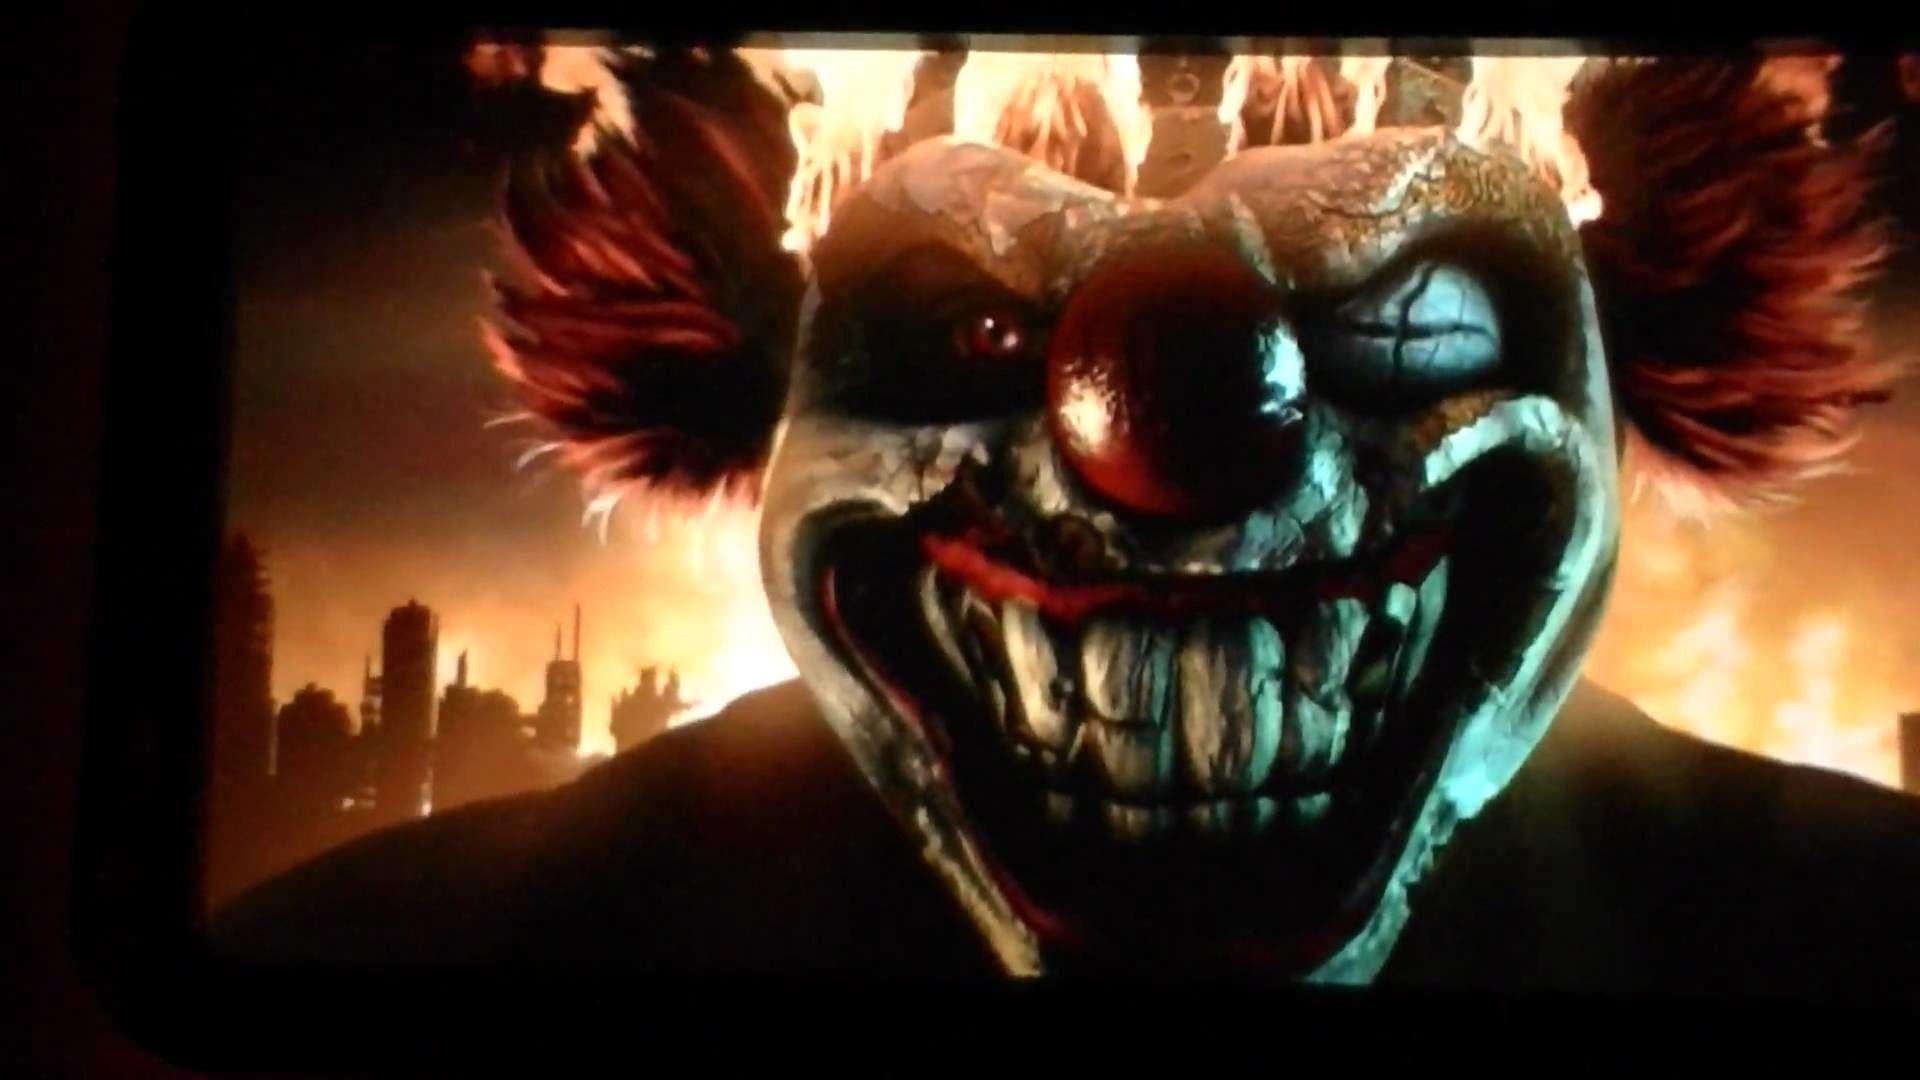 Twisted Metal Sweet Tooth Wallpaper